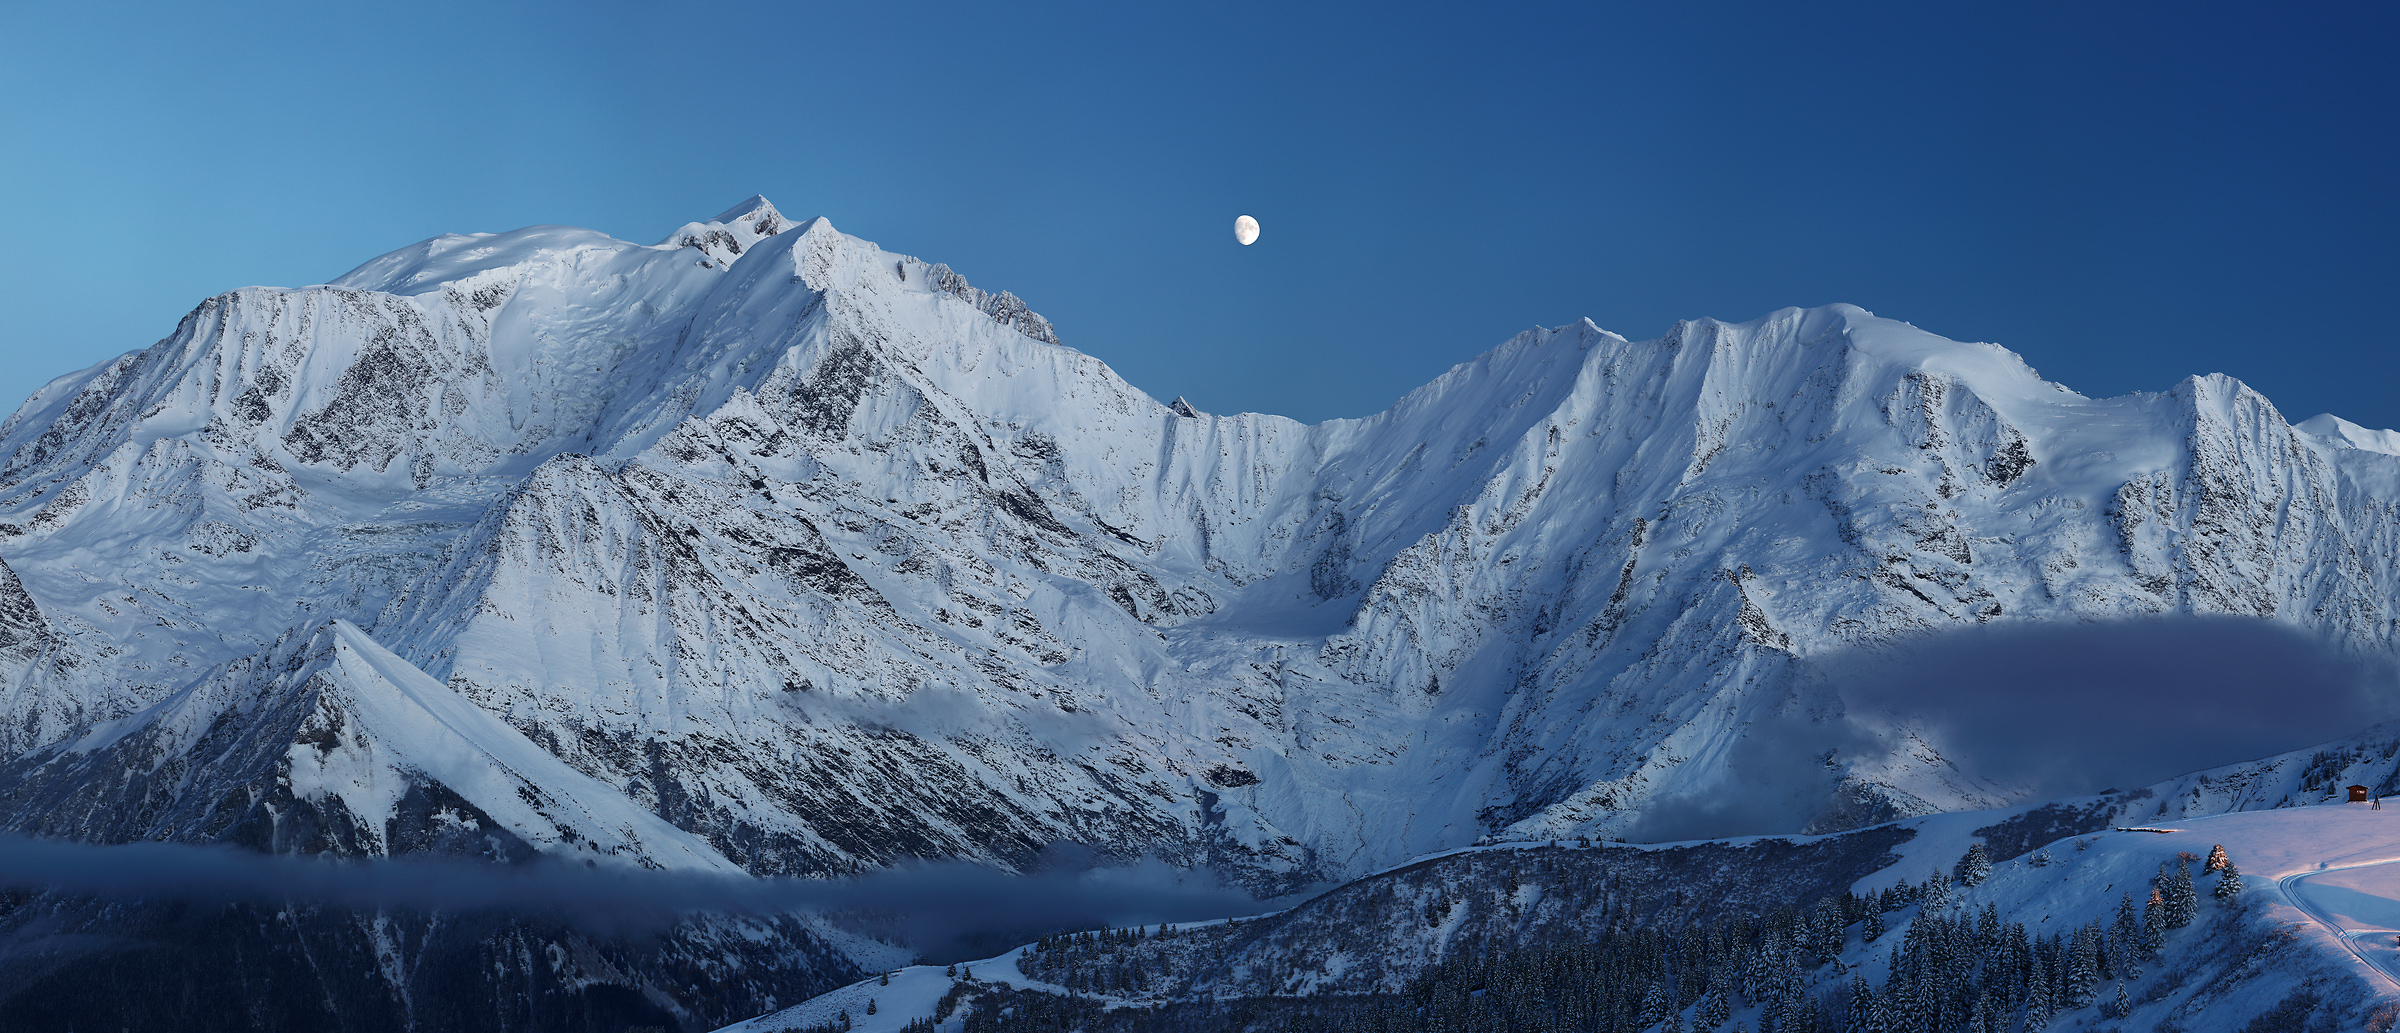 283 megapixels! A very high resolution, large-format VAST photo print of a mountain range at nighttime with the moon; landscape photograph created by Alexandre Deschaumes in Mont Blanc Massif, Saint-Gervais-les-Bains, France